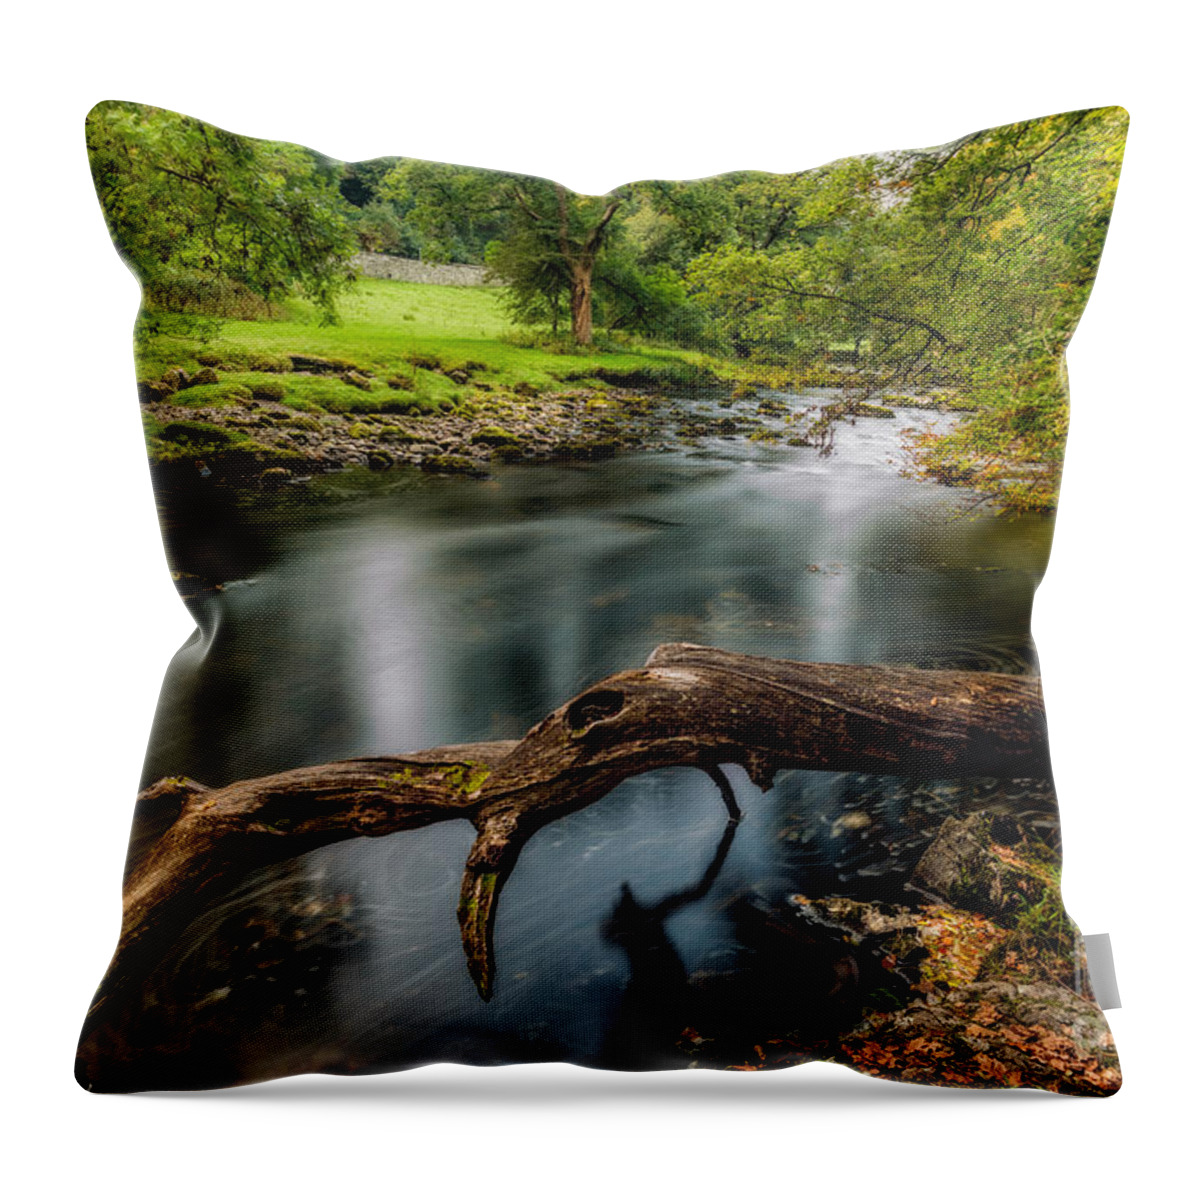 Betws-y-coed Throw Pillow featuring the photograph Fallen Tree by Adrian Evans